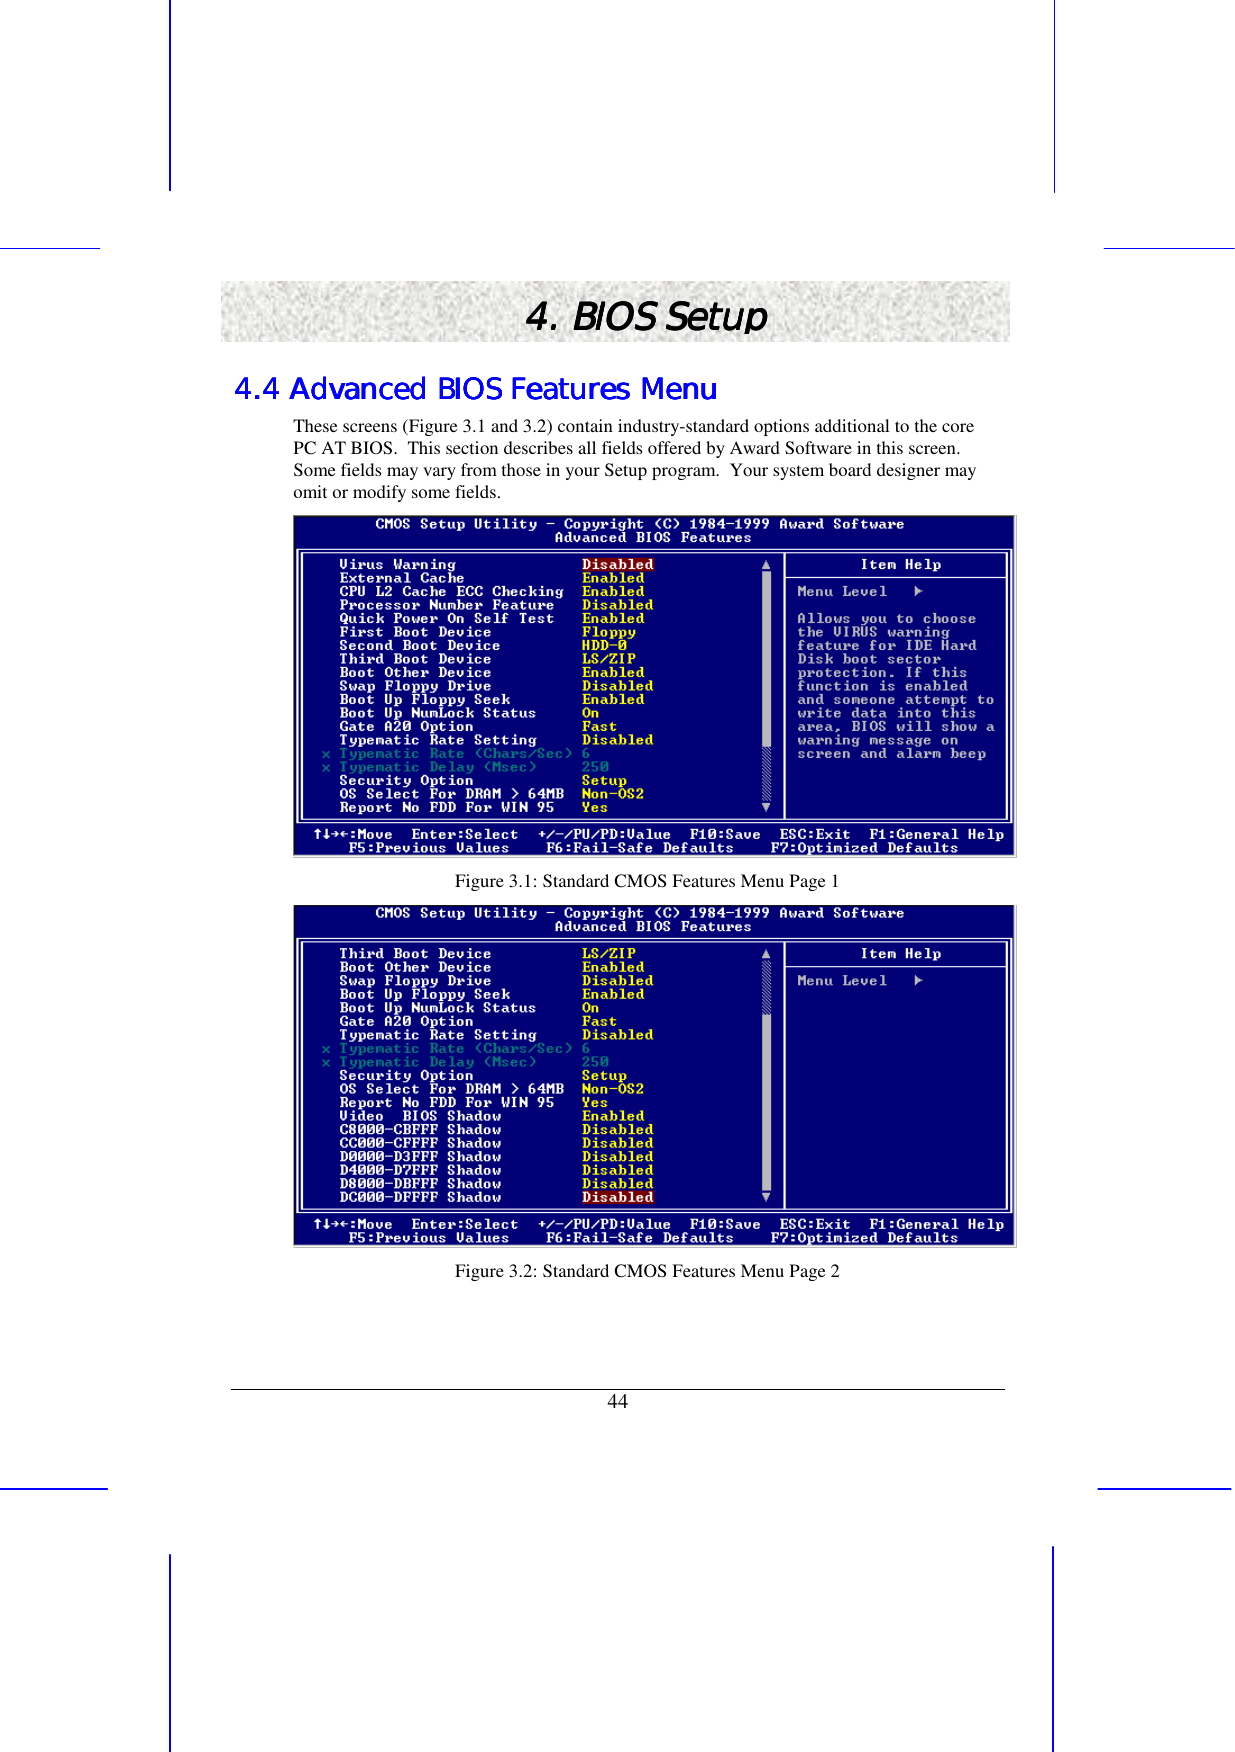   44 4. BIOS Setup4. BIOS Setup4. BIOS Setup4. BIOS Setup    4.4 Advanced BIOS Features Menu4.4 Advanced BIOS Features Menu4.4 Advanced BIOS Features Menu4.4 Advanced BIOS Features Menu    These screens (Figure 3.1 and 3.2) contain industry-standard options additional to the core PC AT BIOS.  This section describes all fields offered by Award Software in this screen. Some fields may vary from those in your Setup program.  Your system board designer may omit or modify some fields.  Figure 3.1: Standard CMOS Features Menu Page 1  Figure 3.2: Standard CMOS Features Menu Page 2 